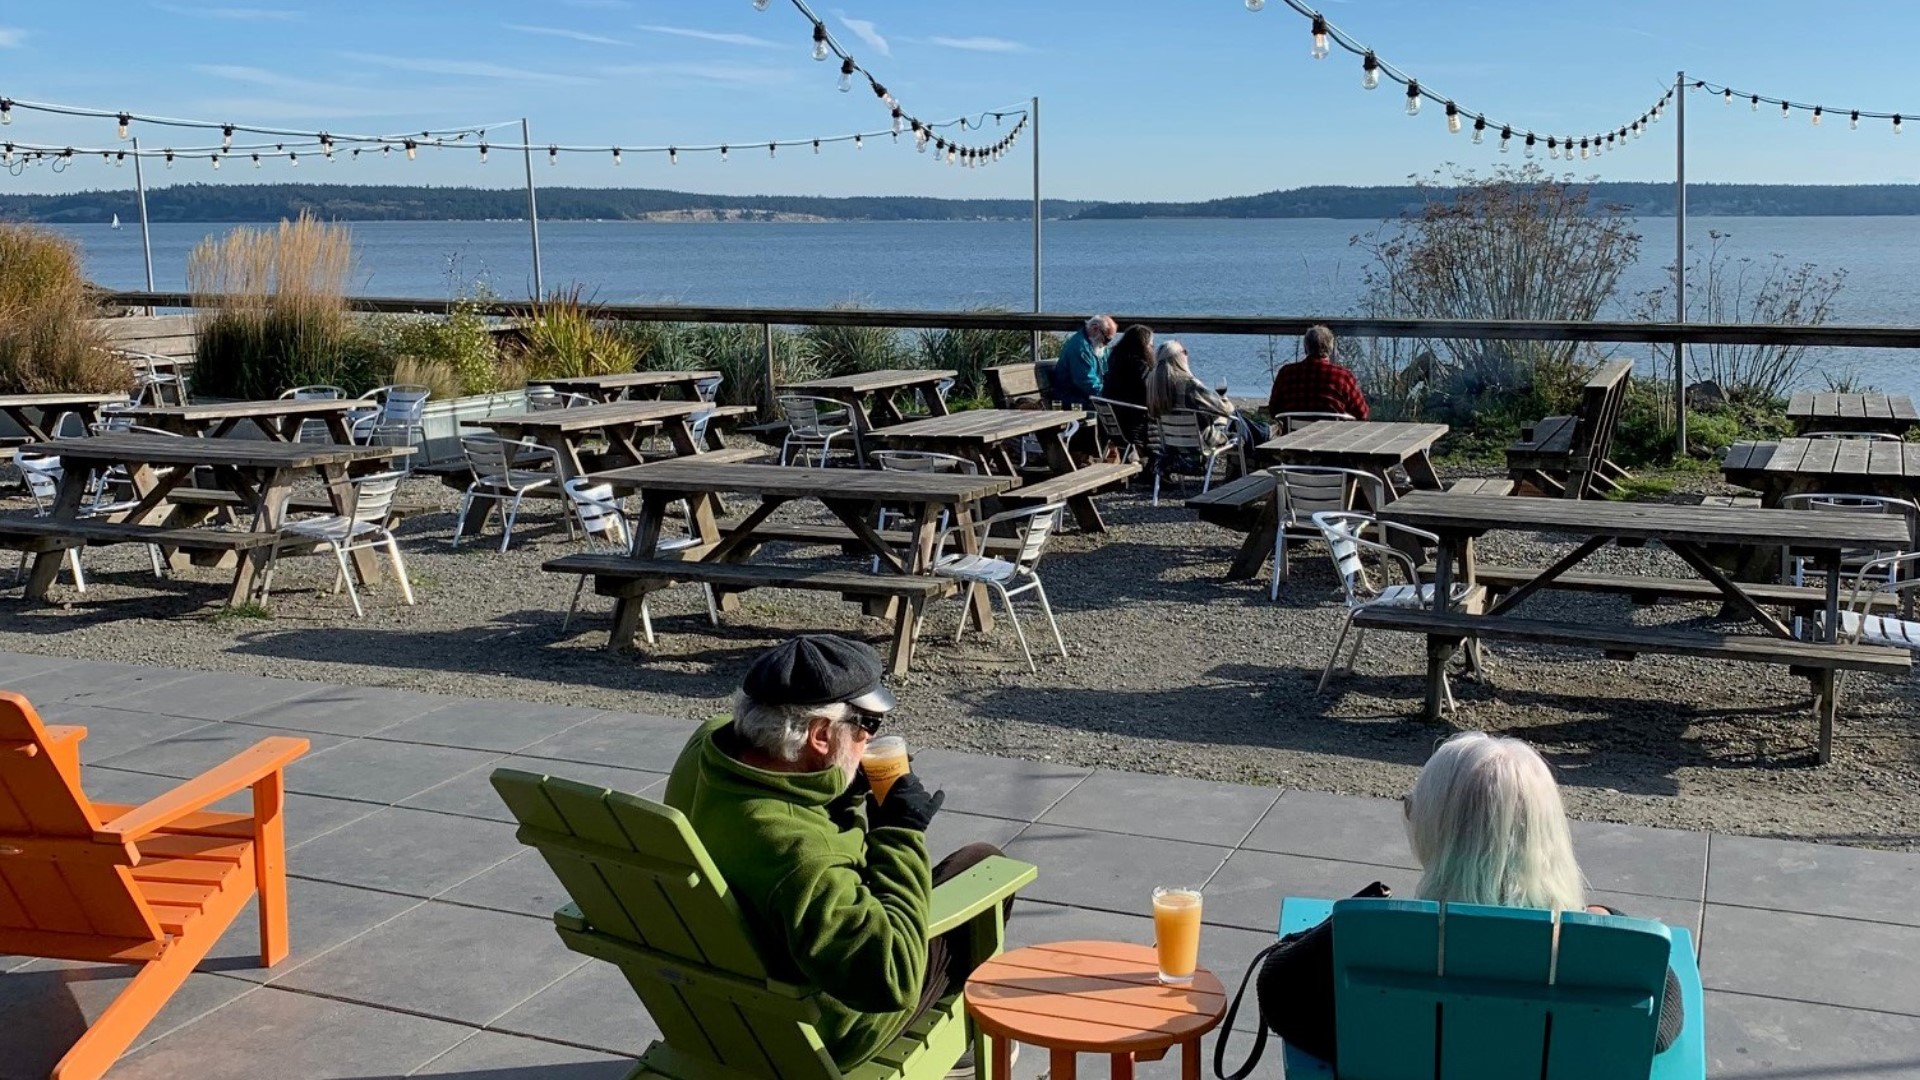 Port Townsend is a small town that likes to live large- whether you're looking for food, nature or art, you'll find it. Sponsored by Windermere Real Estate.